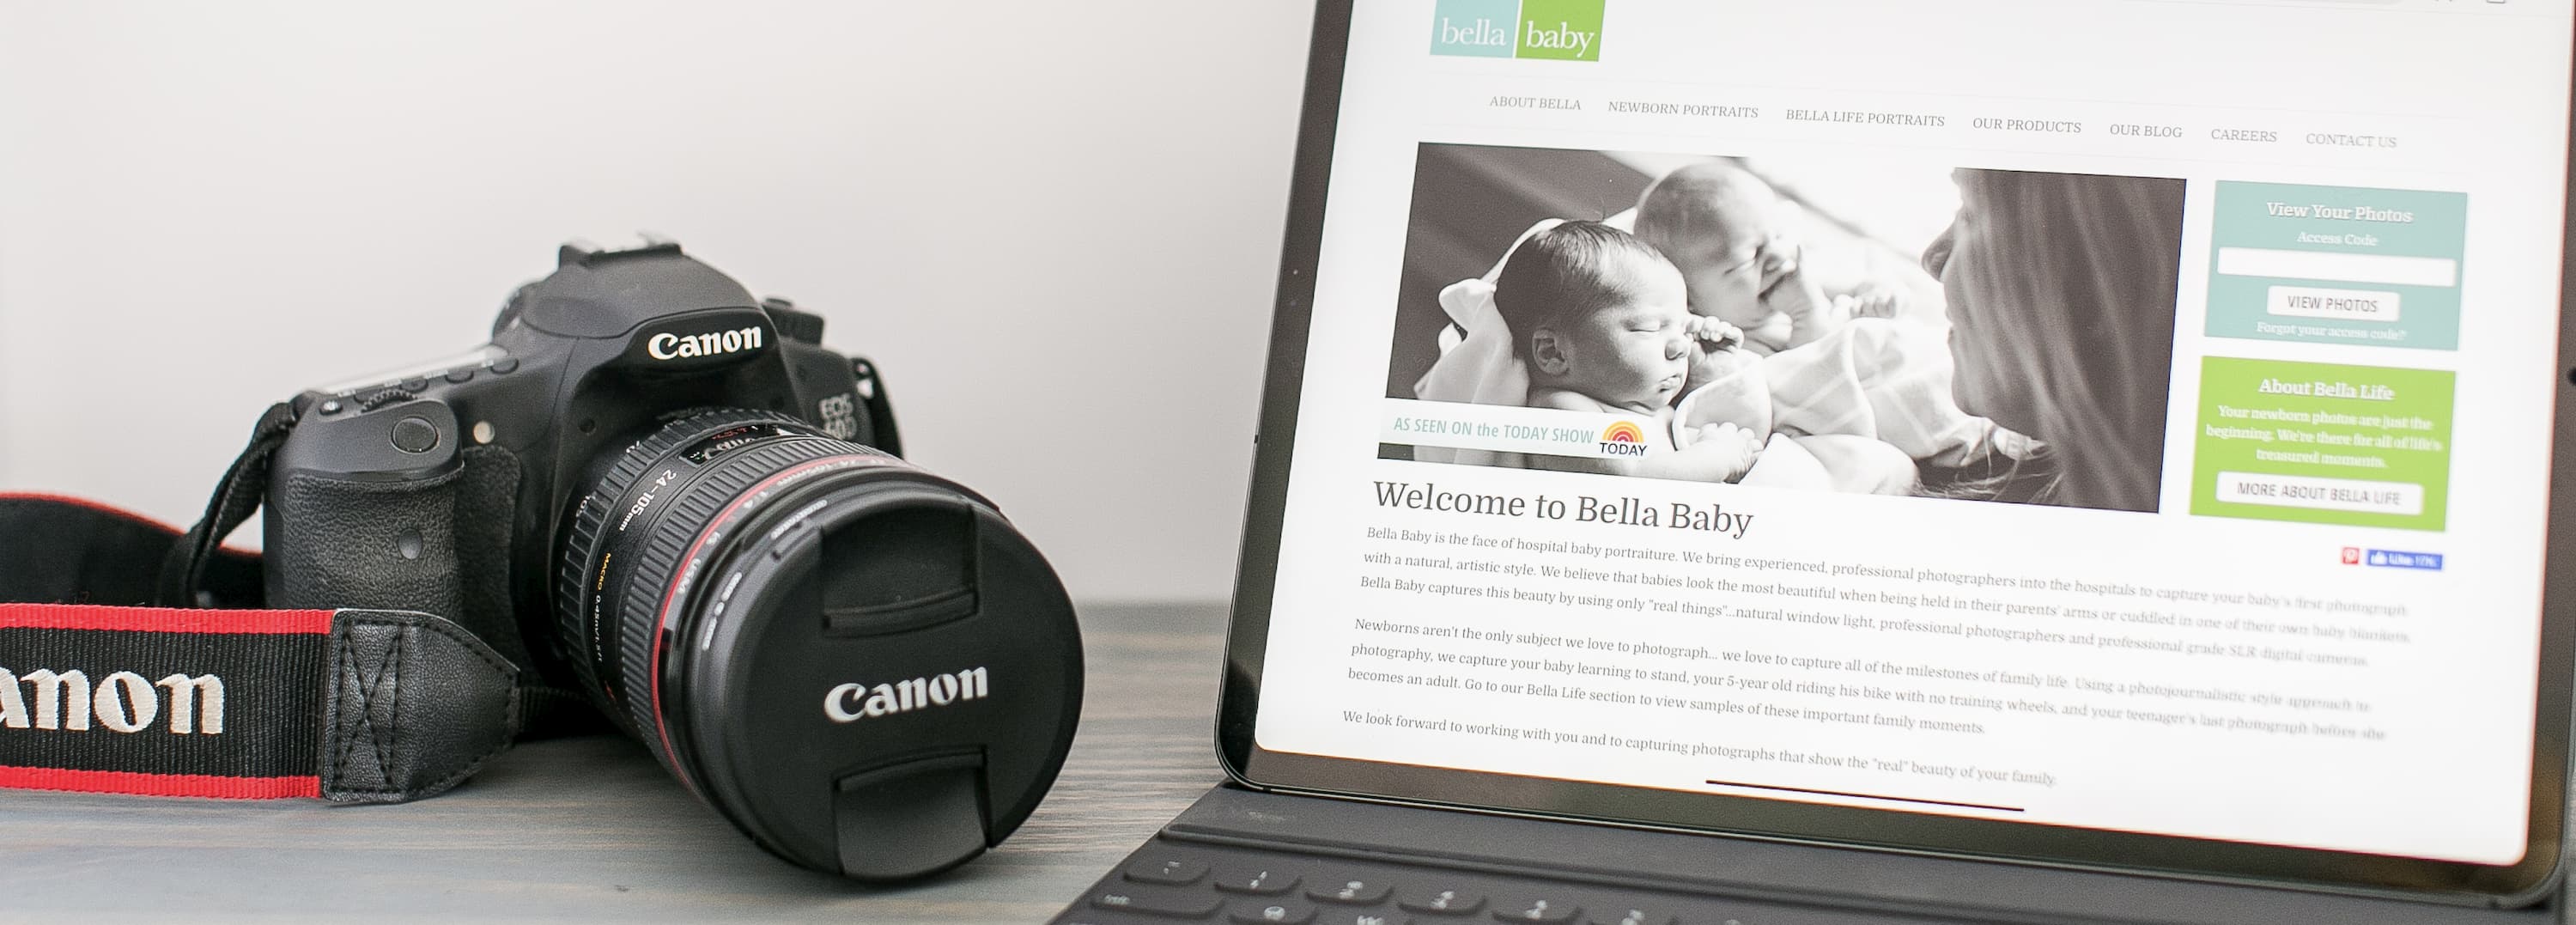 A professional camera sitting to the left of a laptop showing Bella-Baby's website